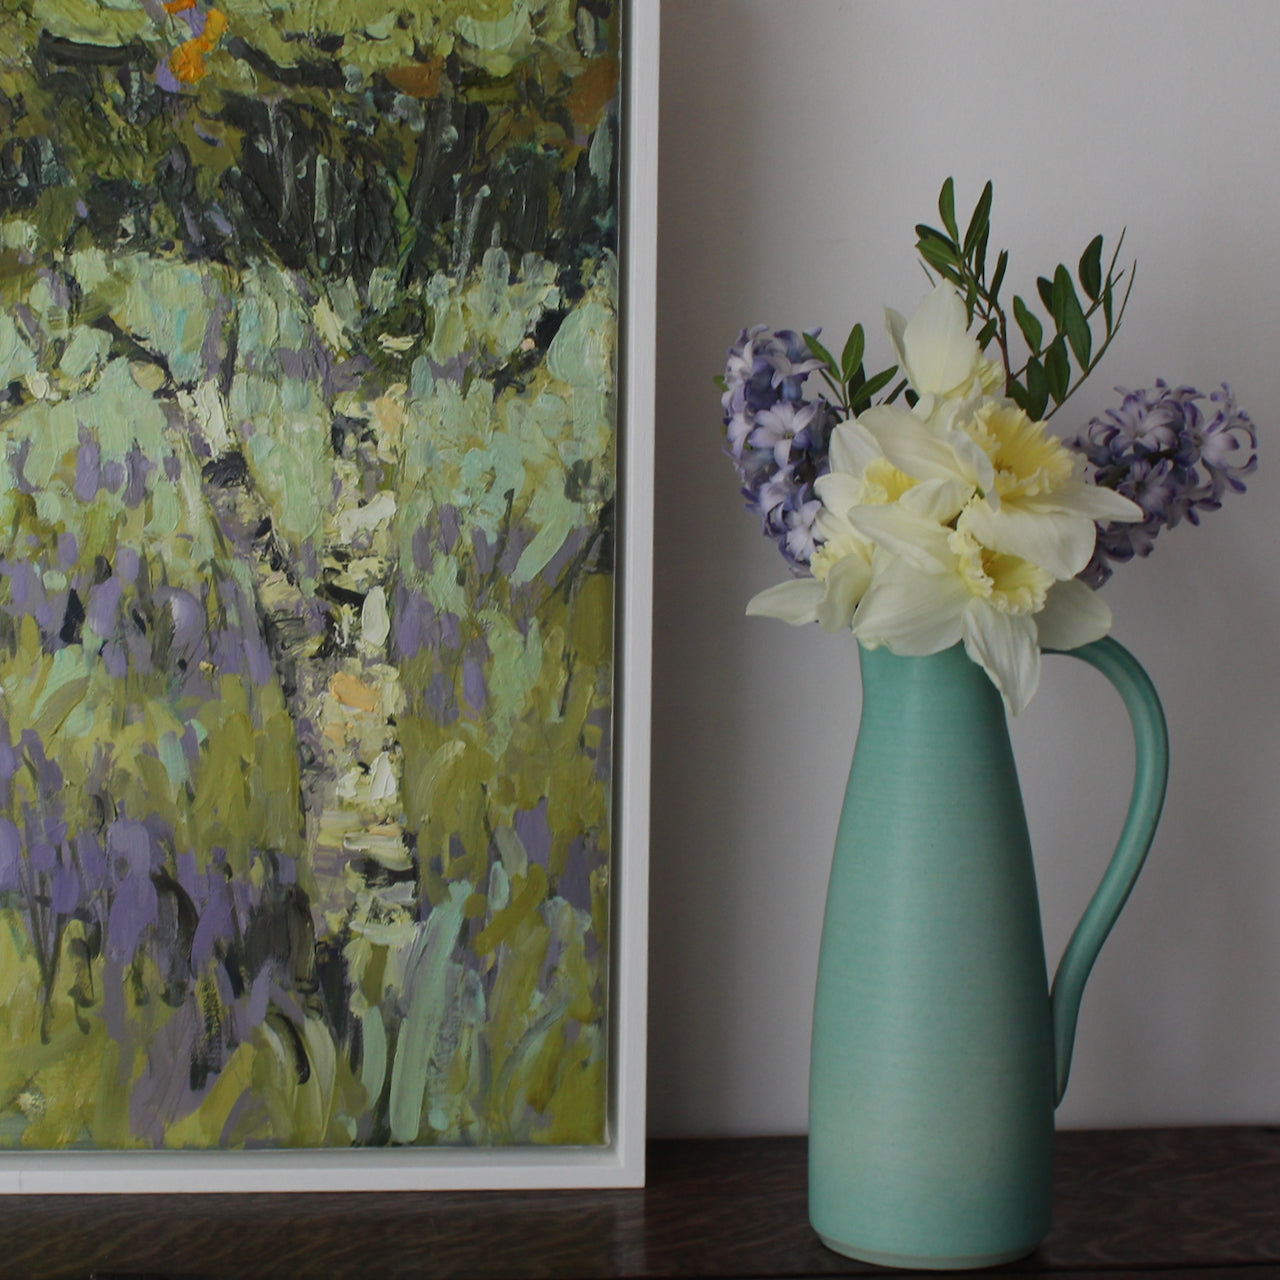 the corner of an abstract painting of trees in a meadow of purple flowers seen next to a green jug with purple flowers and pale lemon daffodils